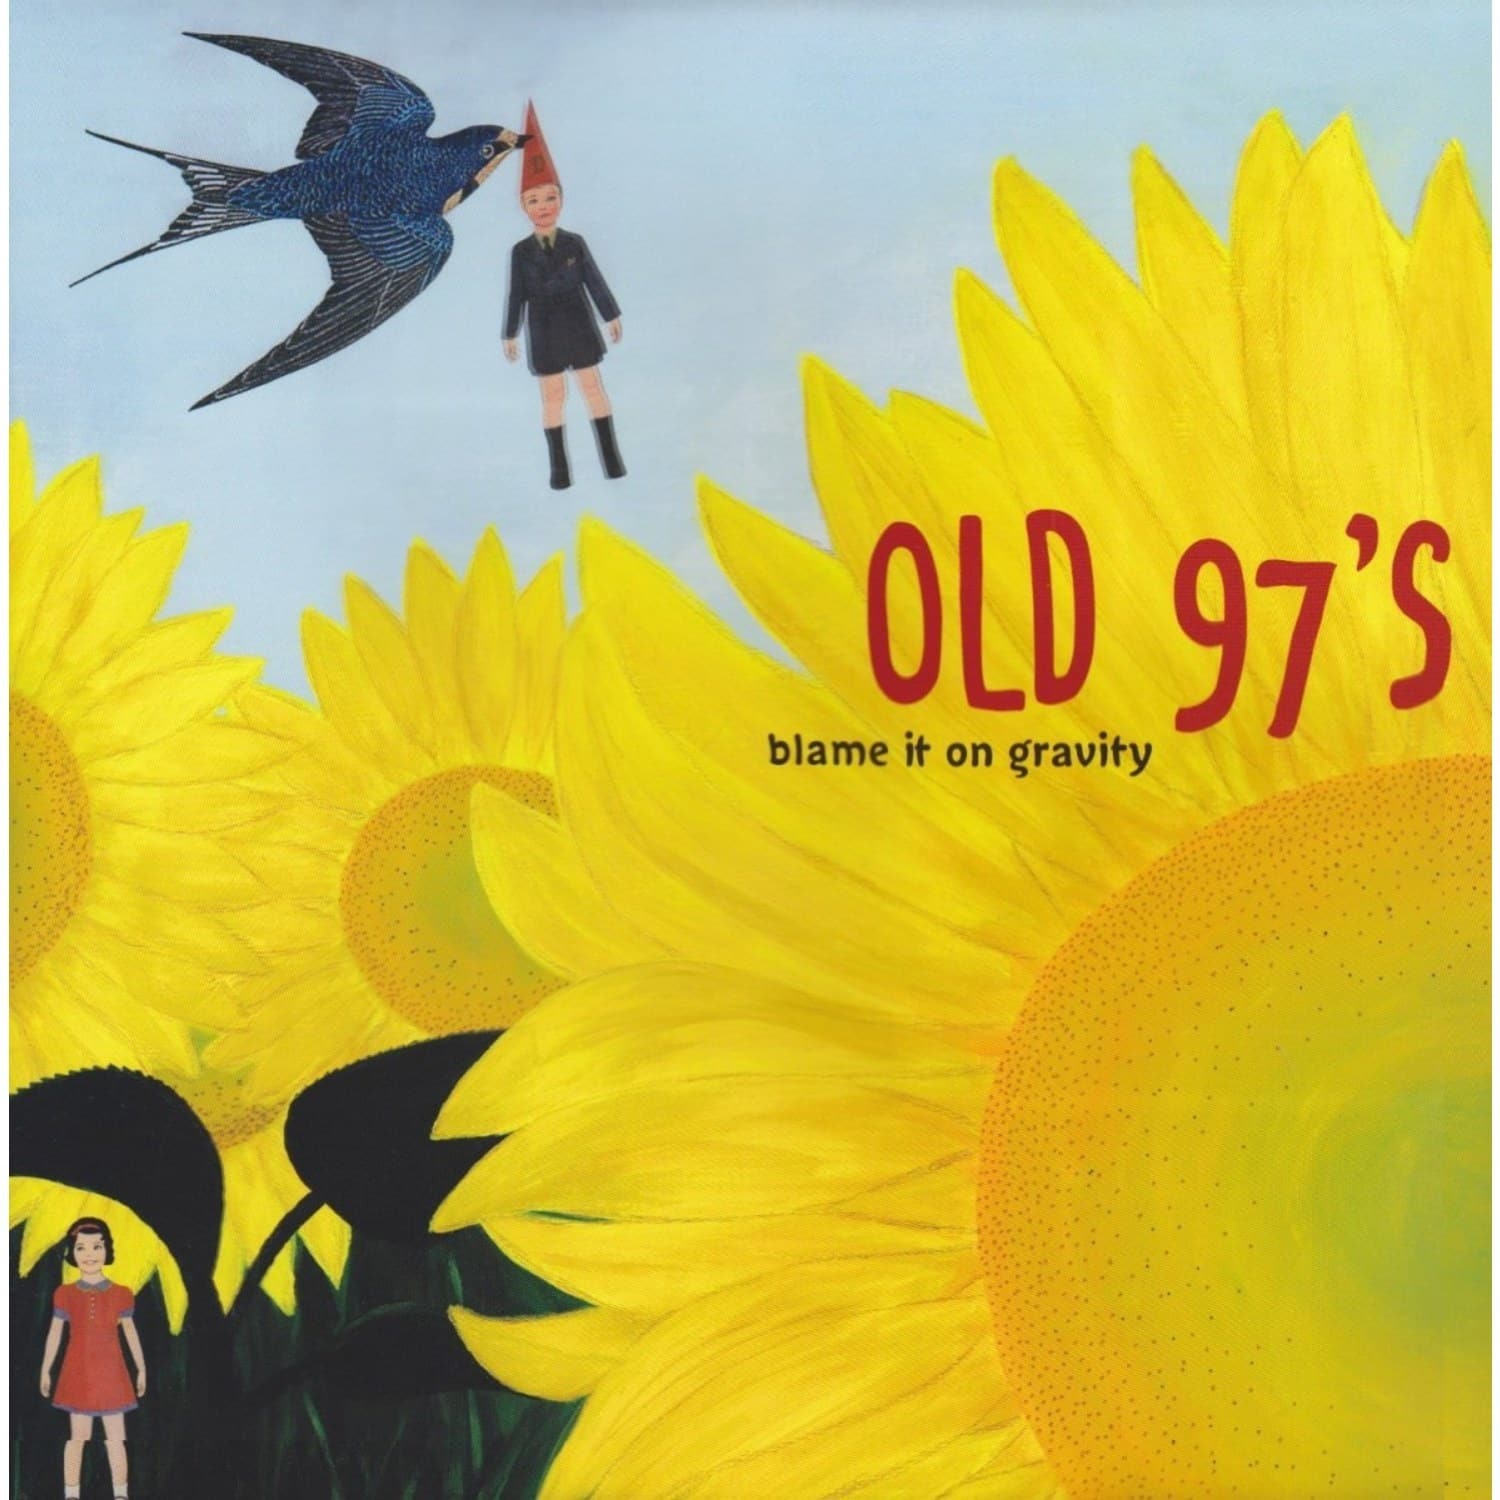 Old 97 s - BLAME IT ON GRAVITY 